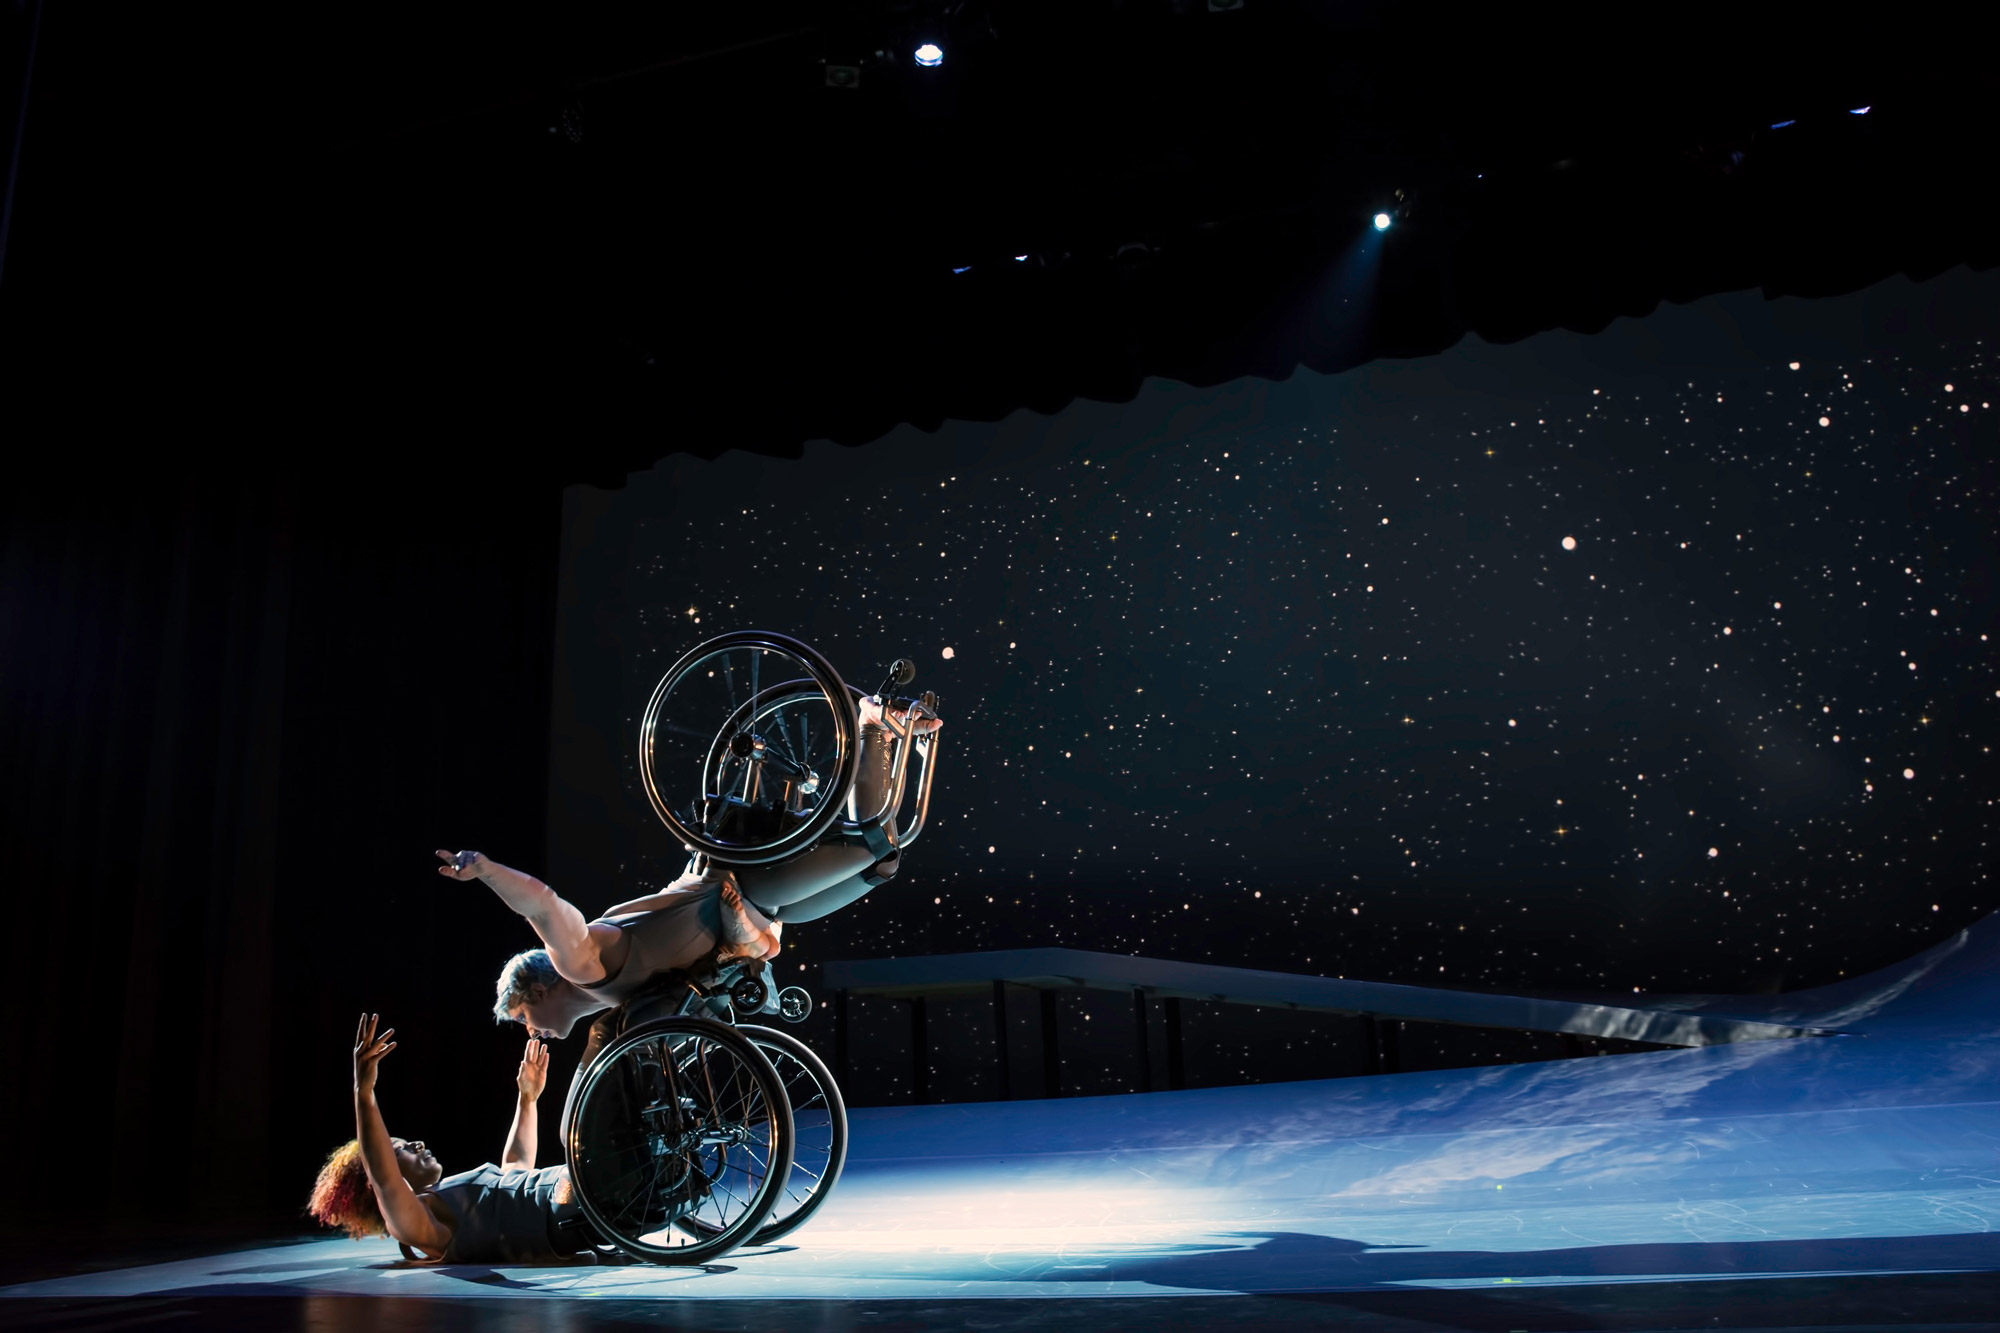 A white woman with short hair in a wheelchair flying in the air with arms spread wide, wheels spinning, and supported by a black woman also in a wheelchair with curly hair who is lifting from the ground below. 